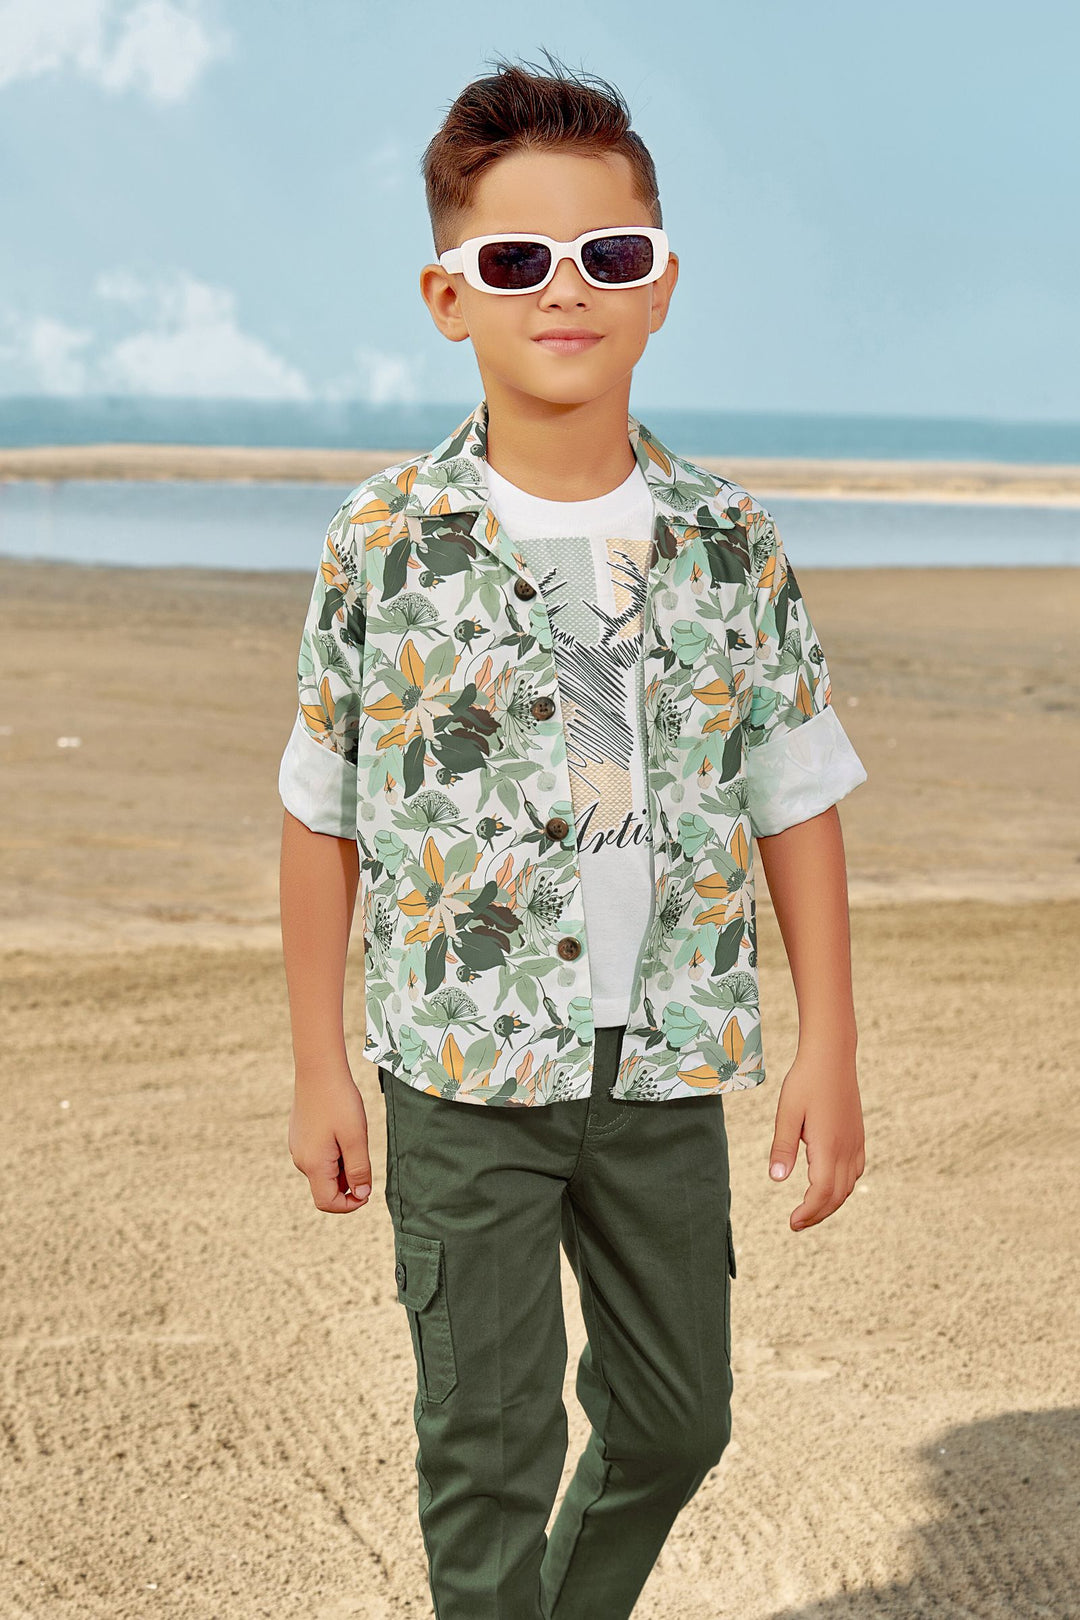 Olive Green with White Printed Blazer, T-Shirt and Pant Set for Boys with Belt